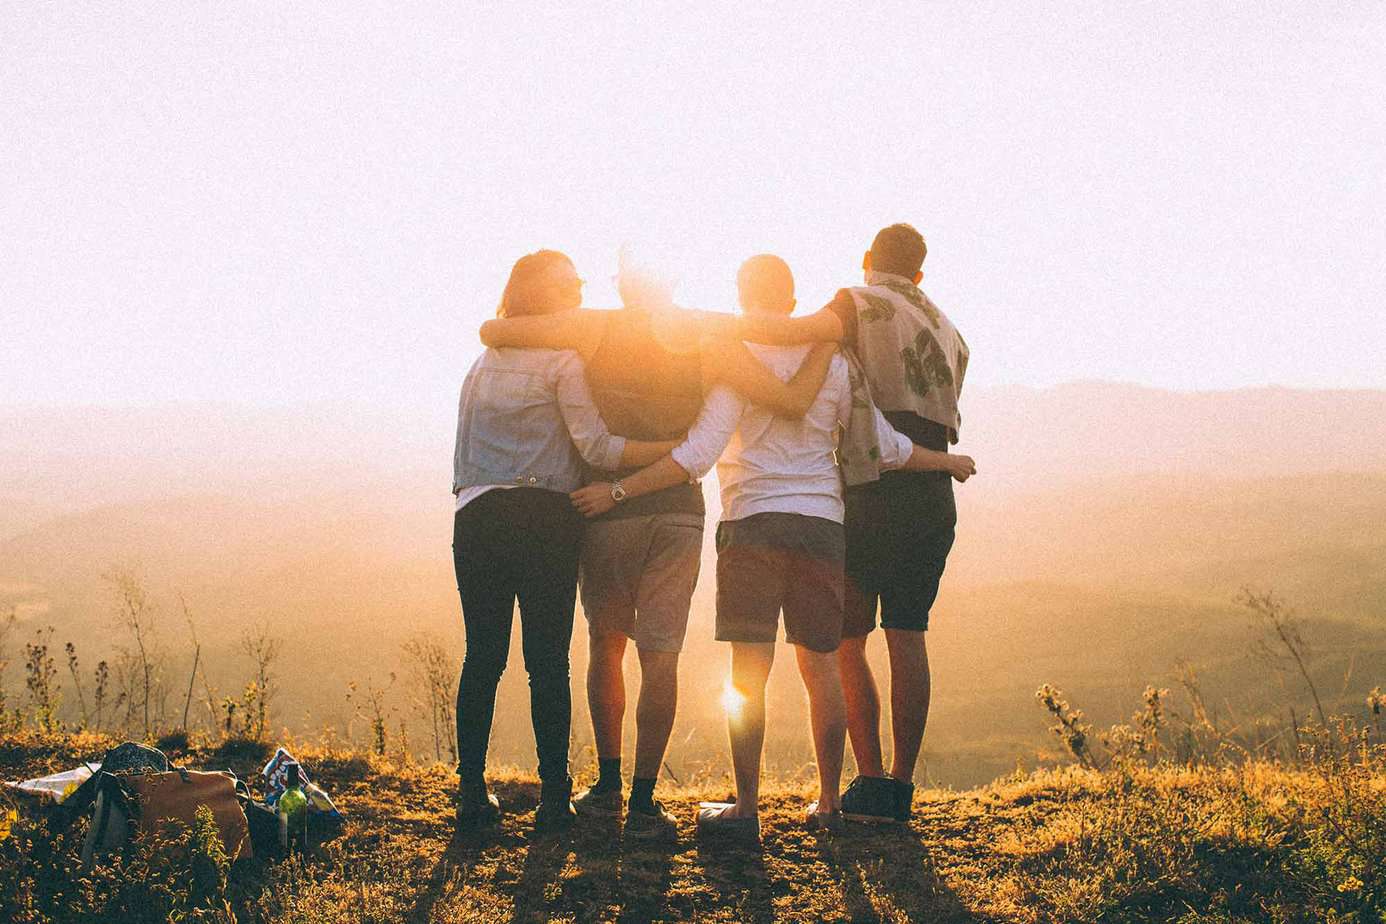 4 men and women arm in arm watching sunset over mountain outside